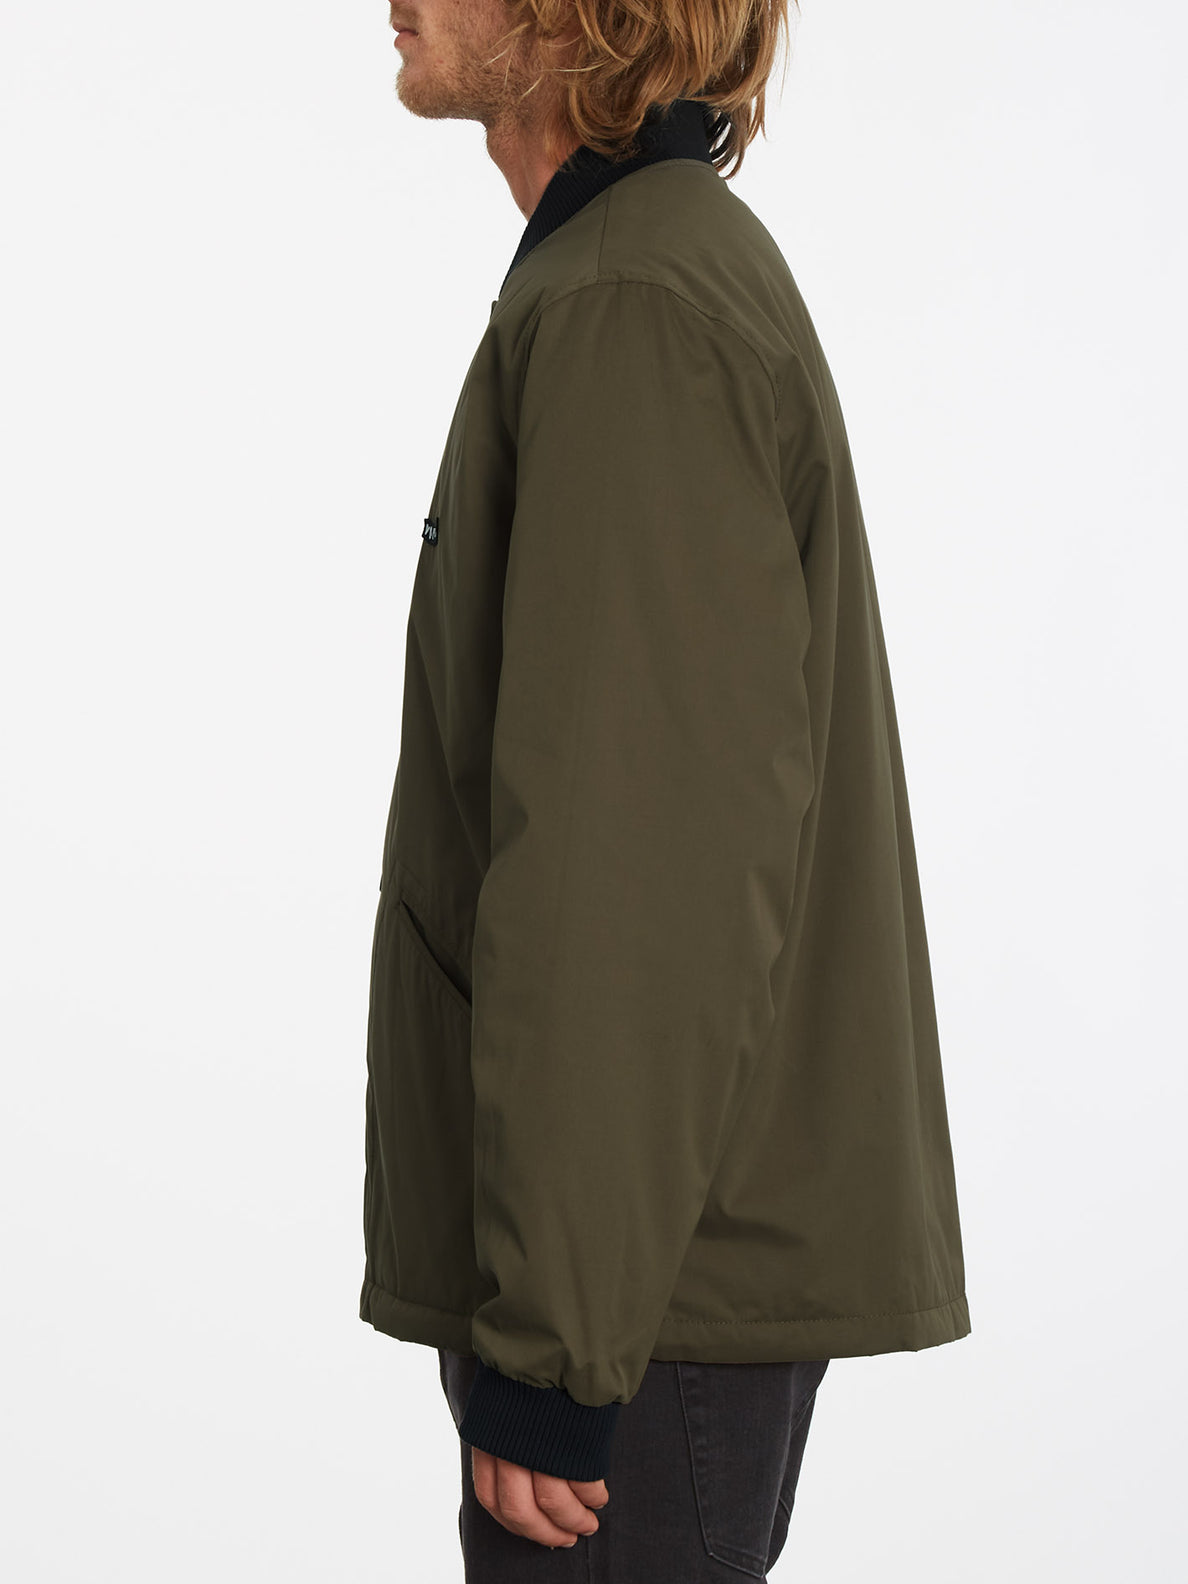 Lookster Jacket (Reversible) - SERVICE GREEN (A1632007_SVG) [1]